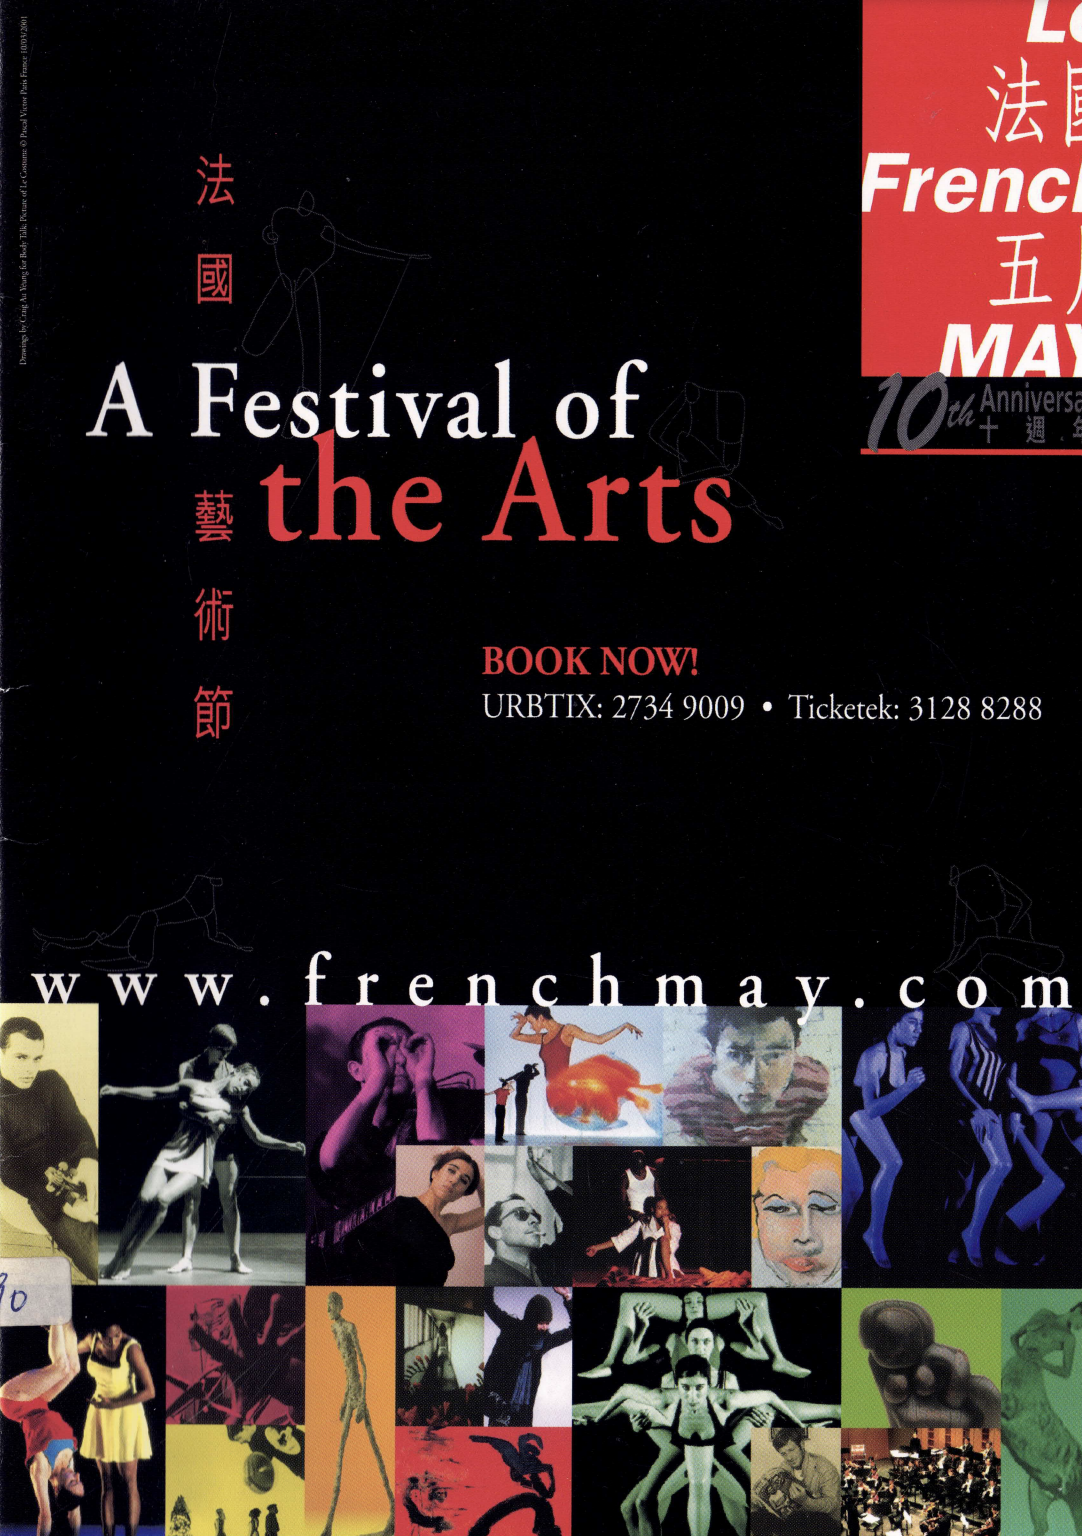 Le French May – A Festival of the Arts: Developing-Time – Brochure (2) 法國五月 法國藝術節：進行時 – 小冊子 (2)